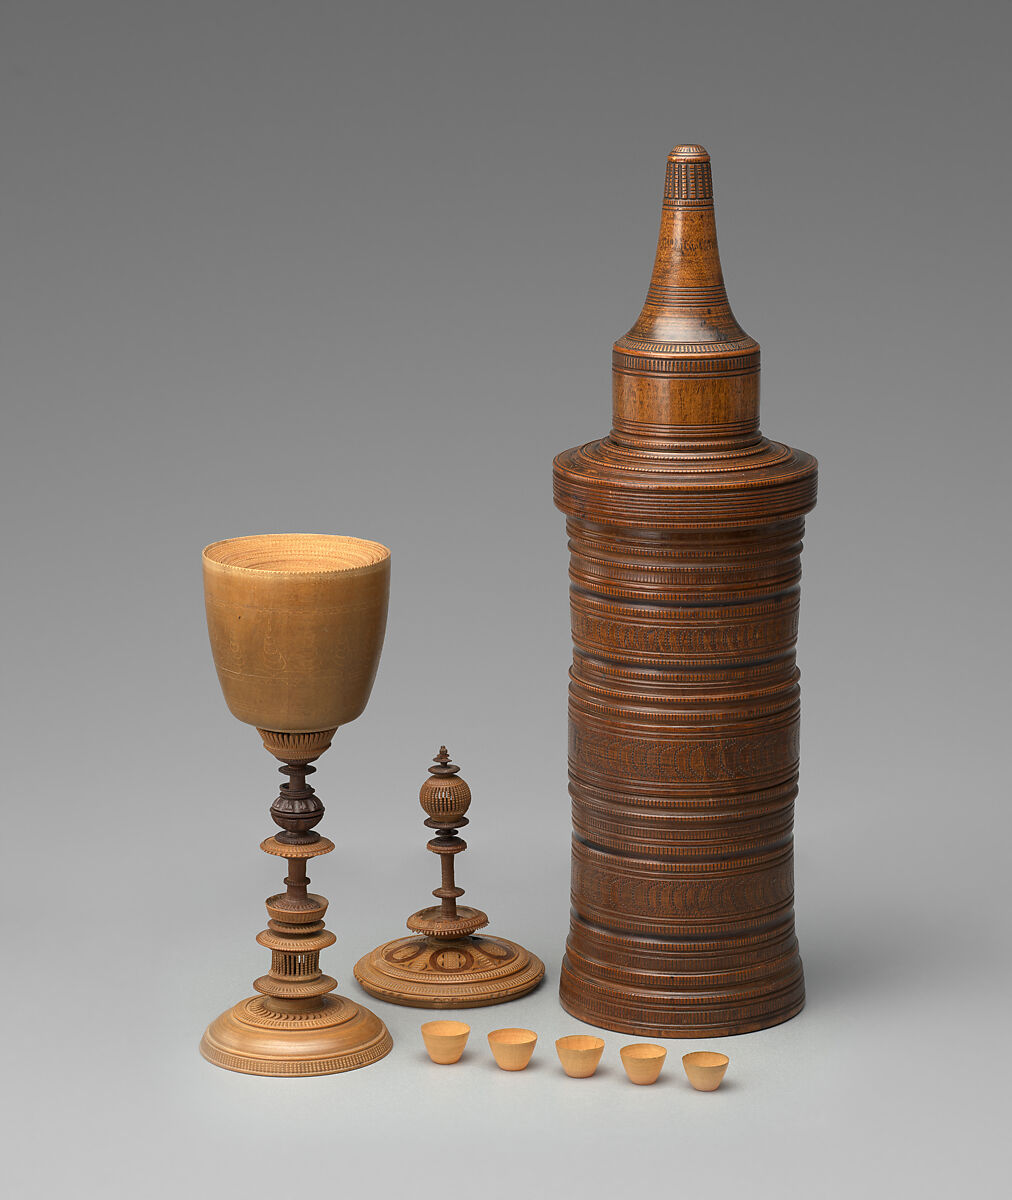 Turned cup and cover with inserts and original case, Unidentified turner, Berchtesgaden, Turned, carved, and stippled maple and plum, partly stained, German, Berchtesgaden